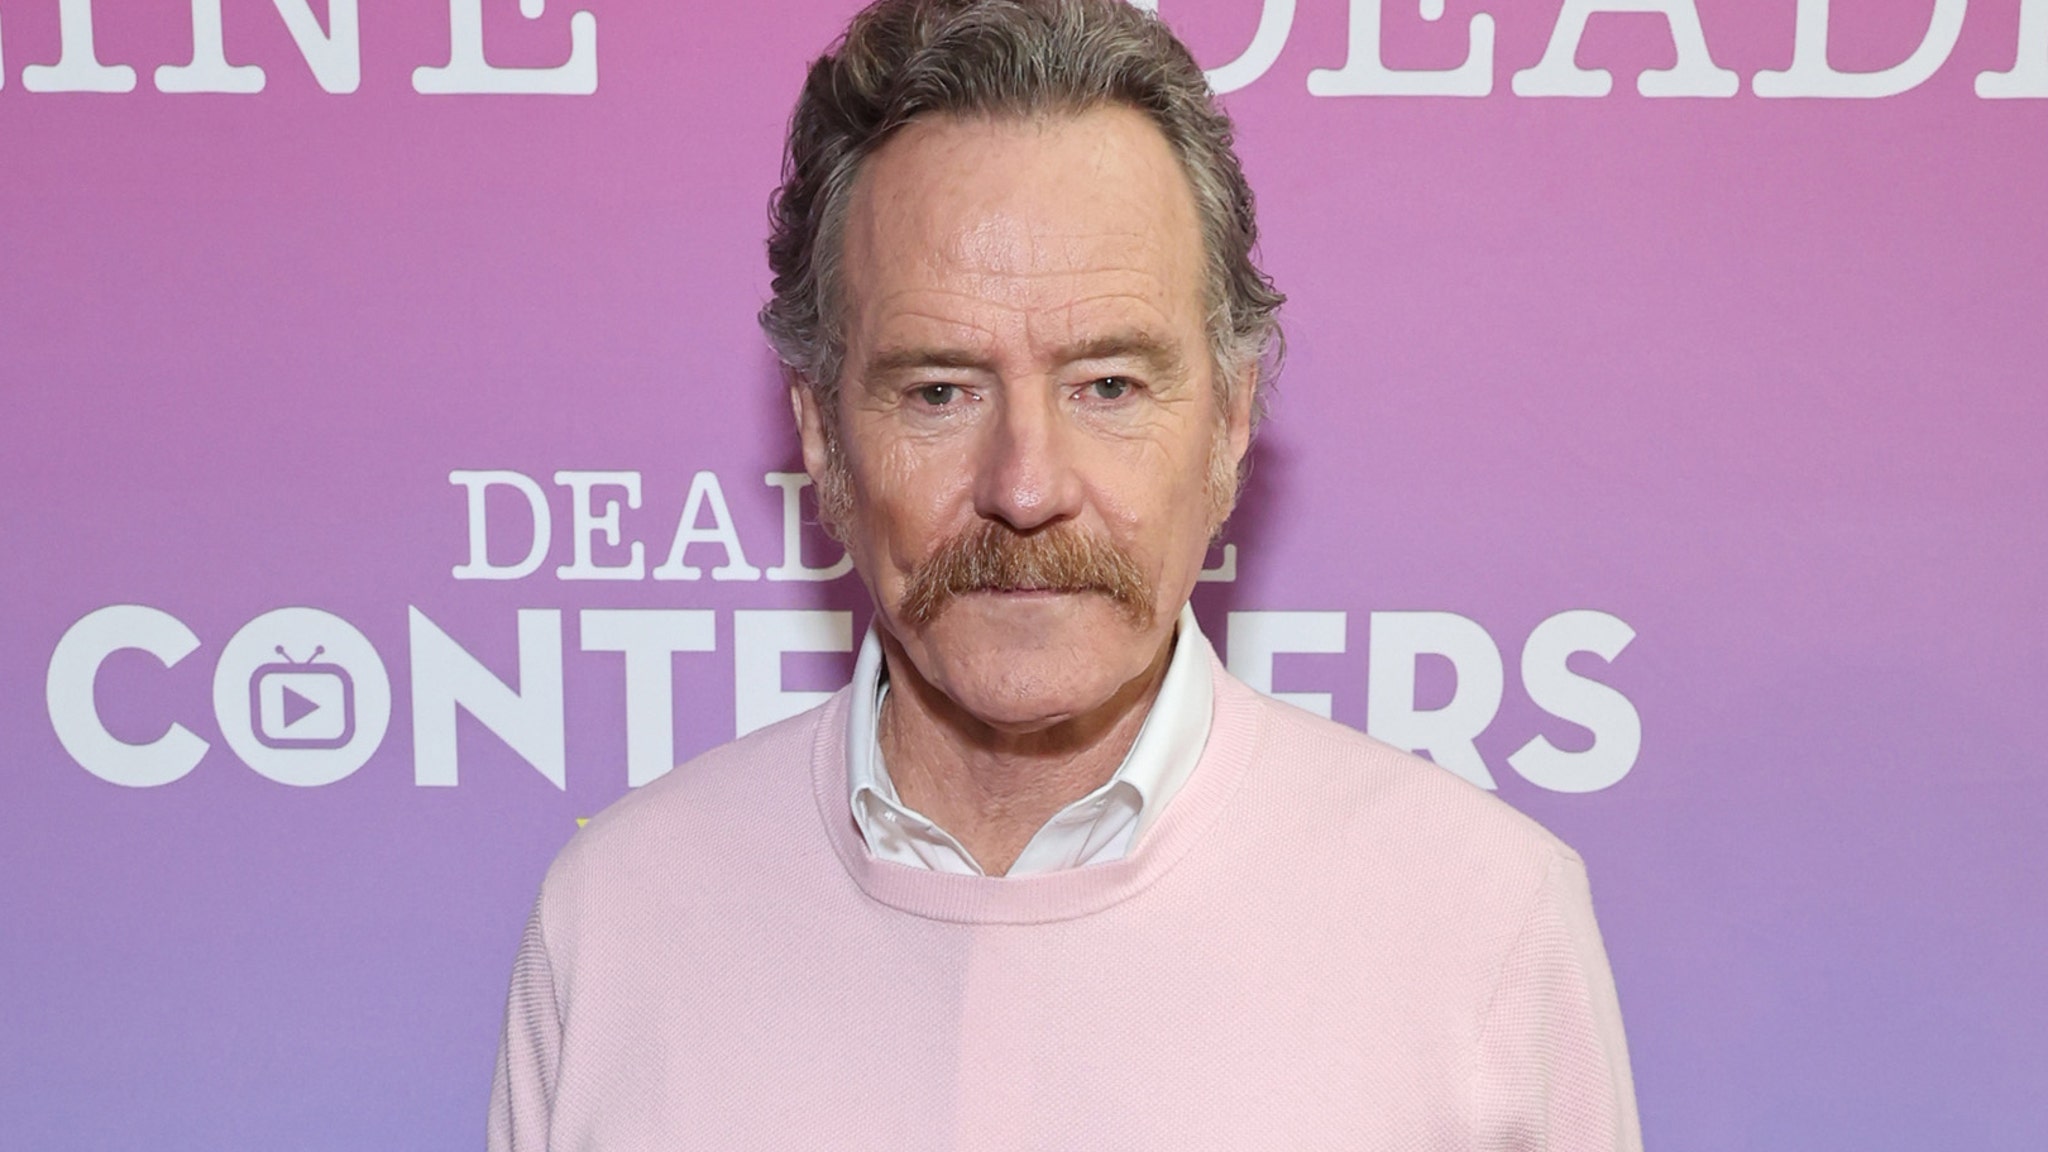 Bryan Cranston Reveals He Was Briefly Wanted For Murder